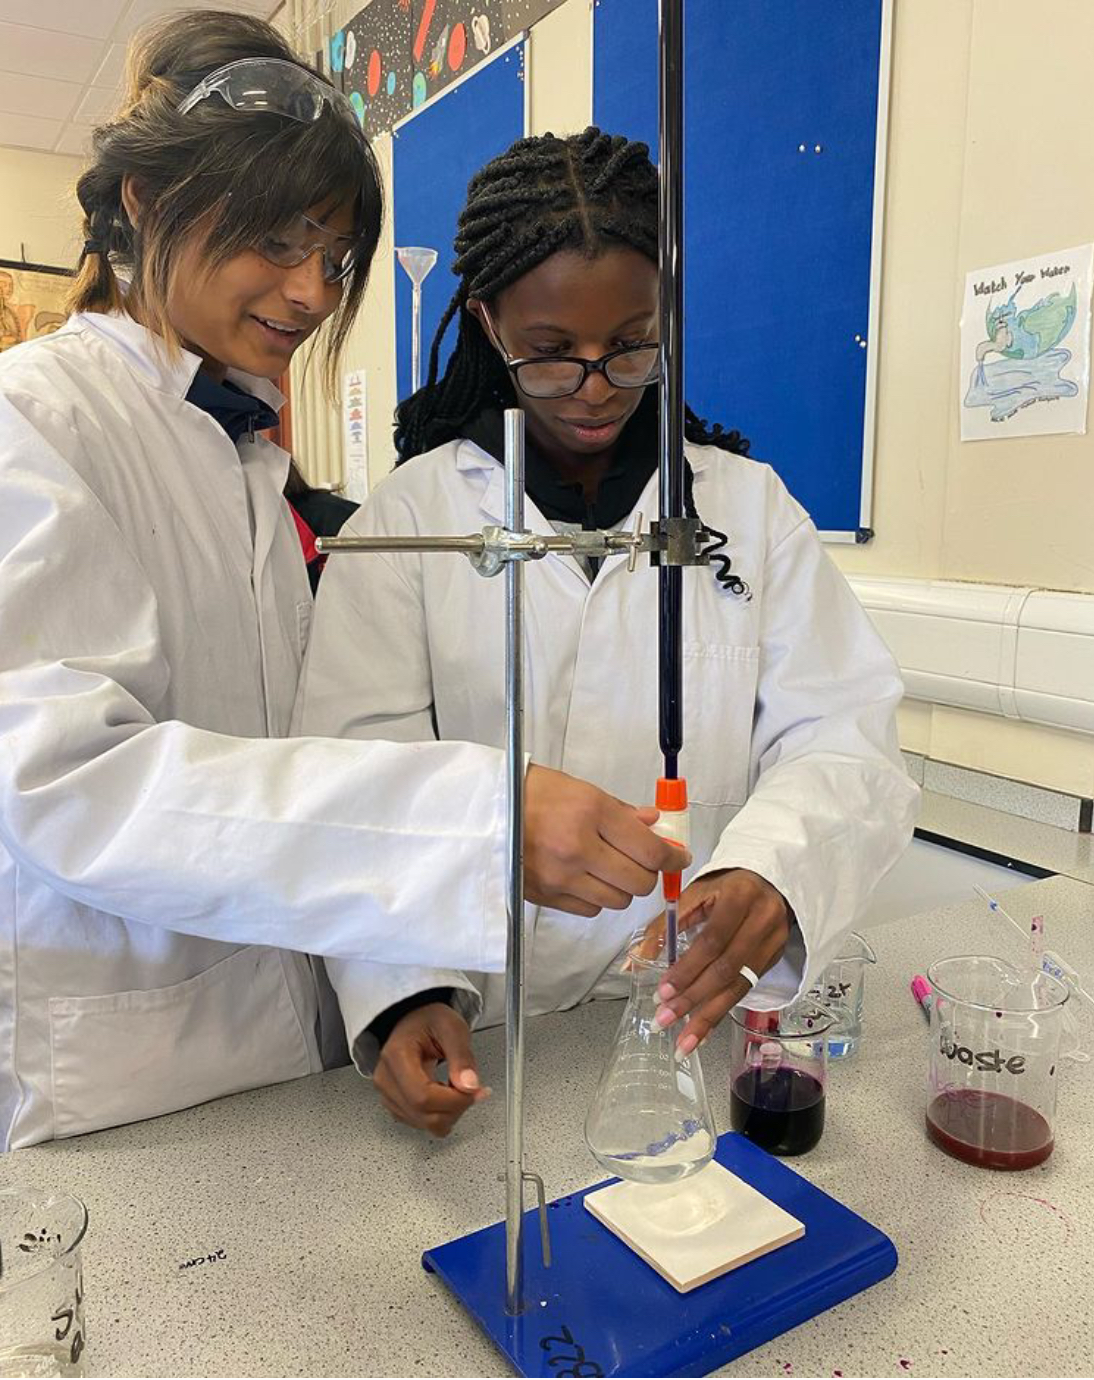 Piper's Hill College students in the science lab carrying out a lab test with white coats and goggles on